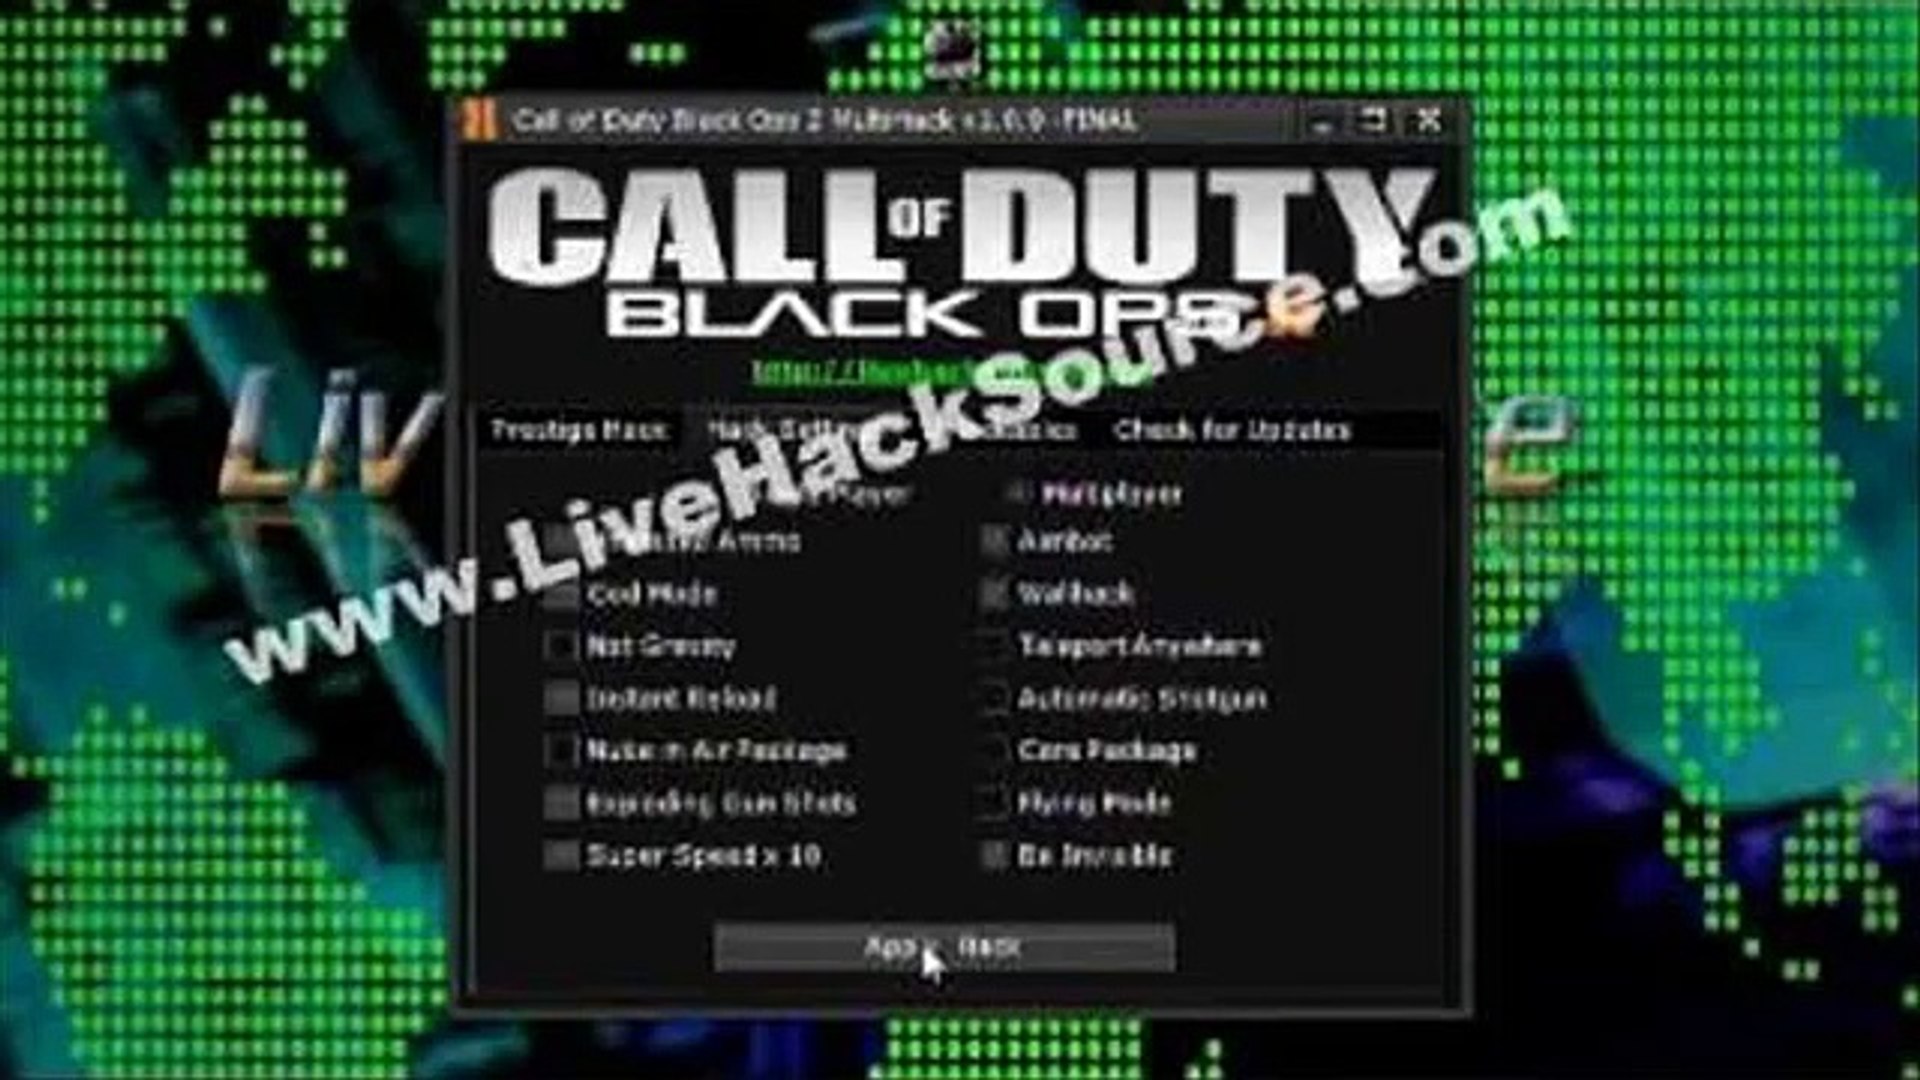 cheats for call of duty black ops 2 zombies ps3 - video Dailymotion